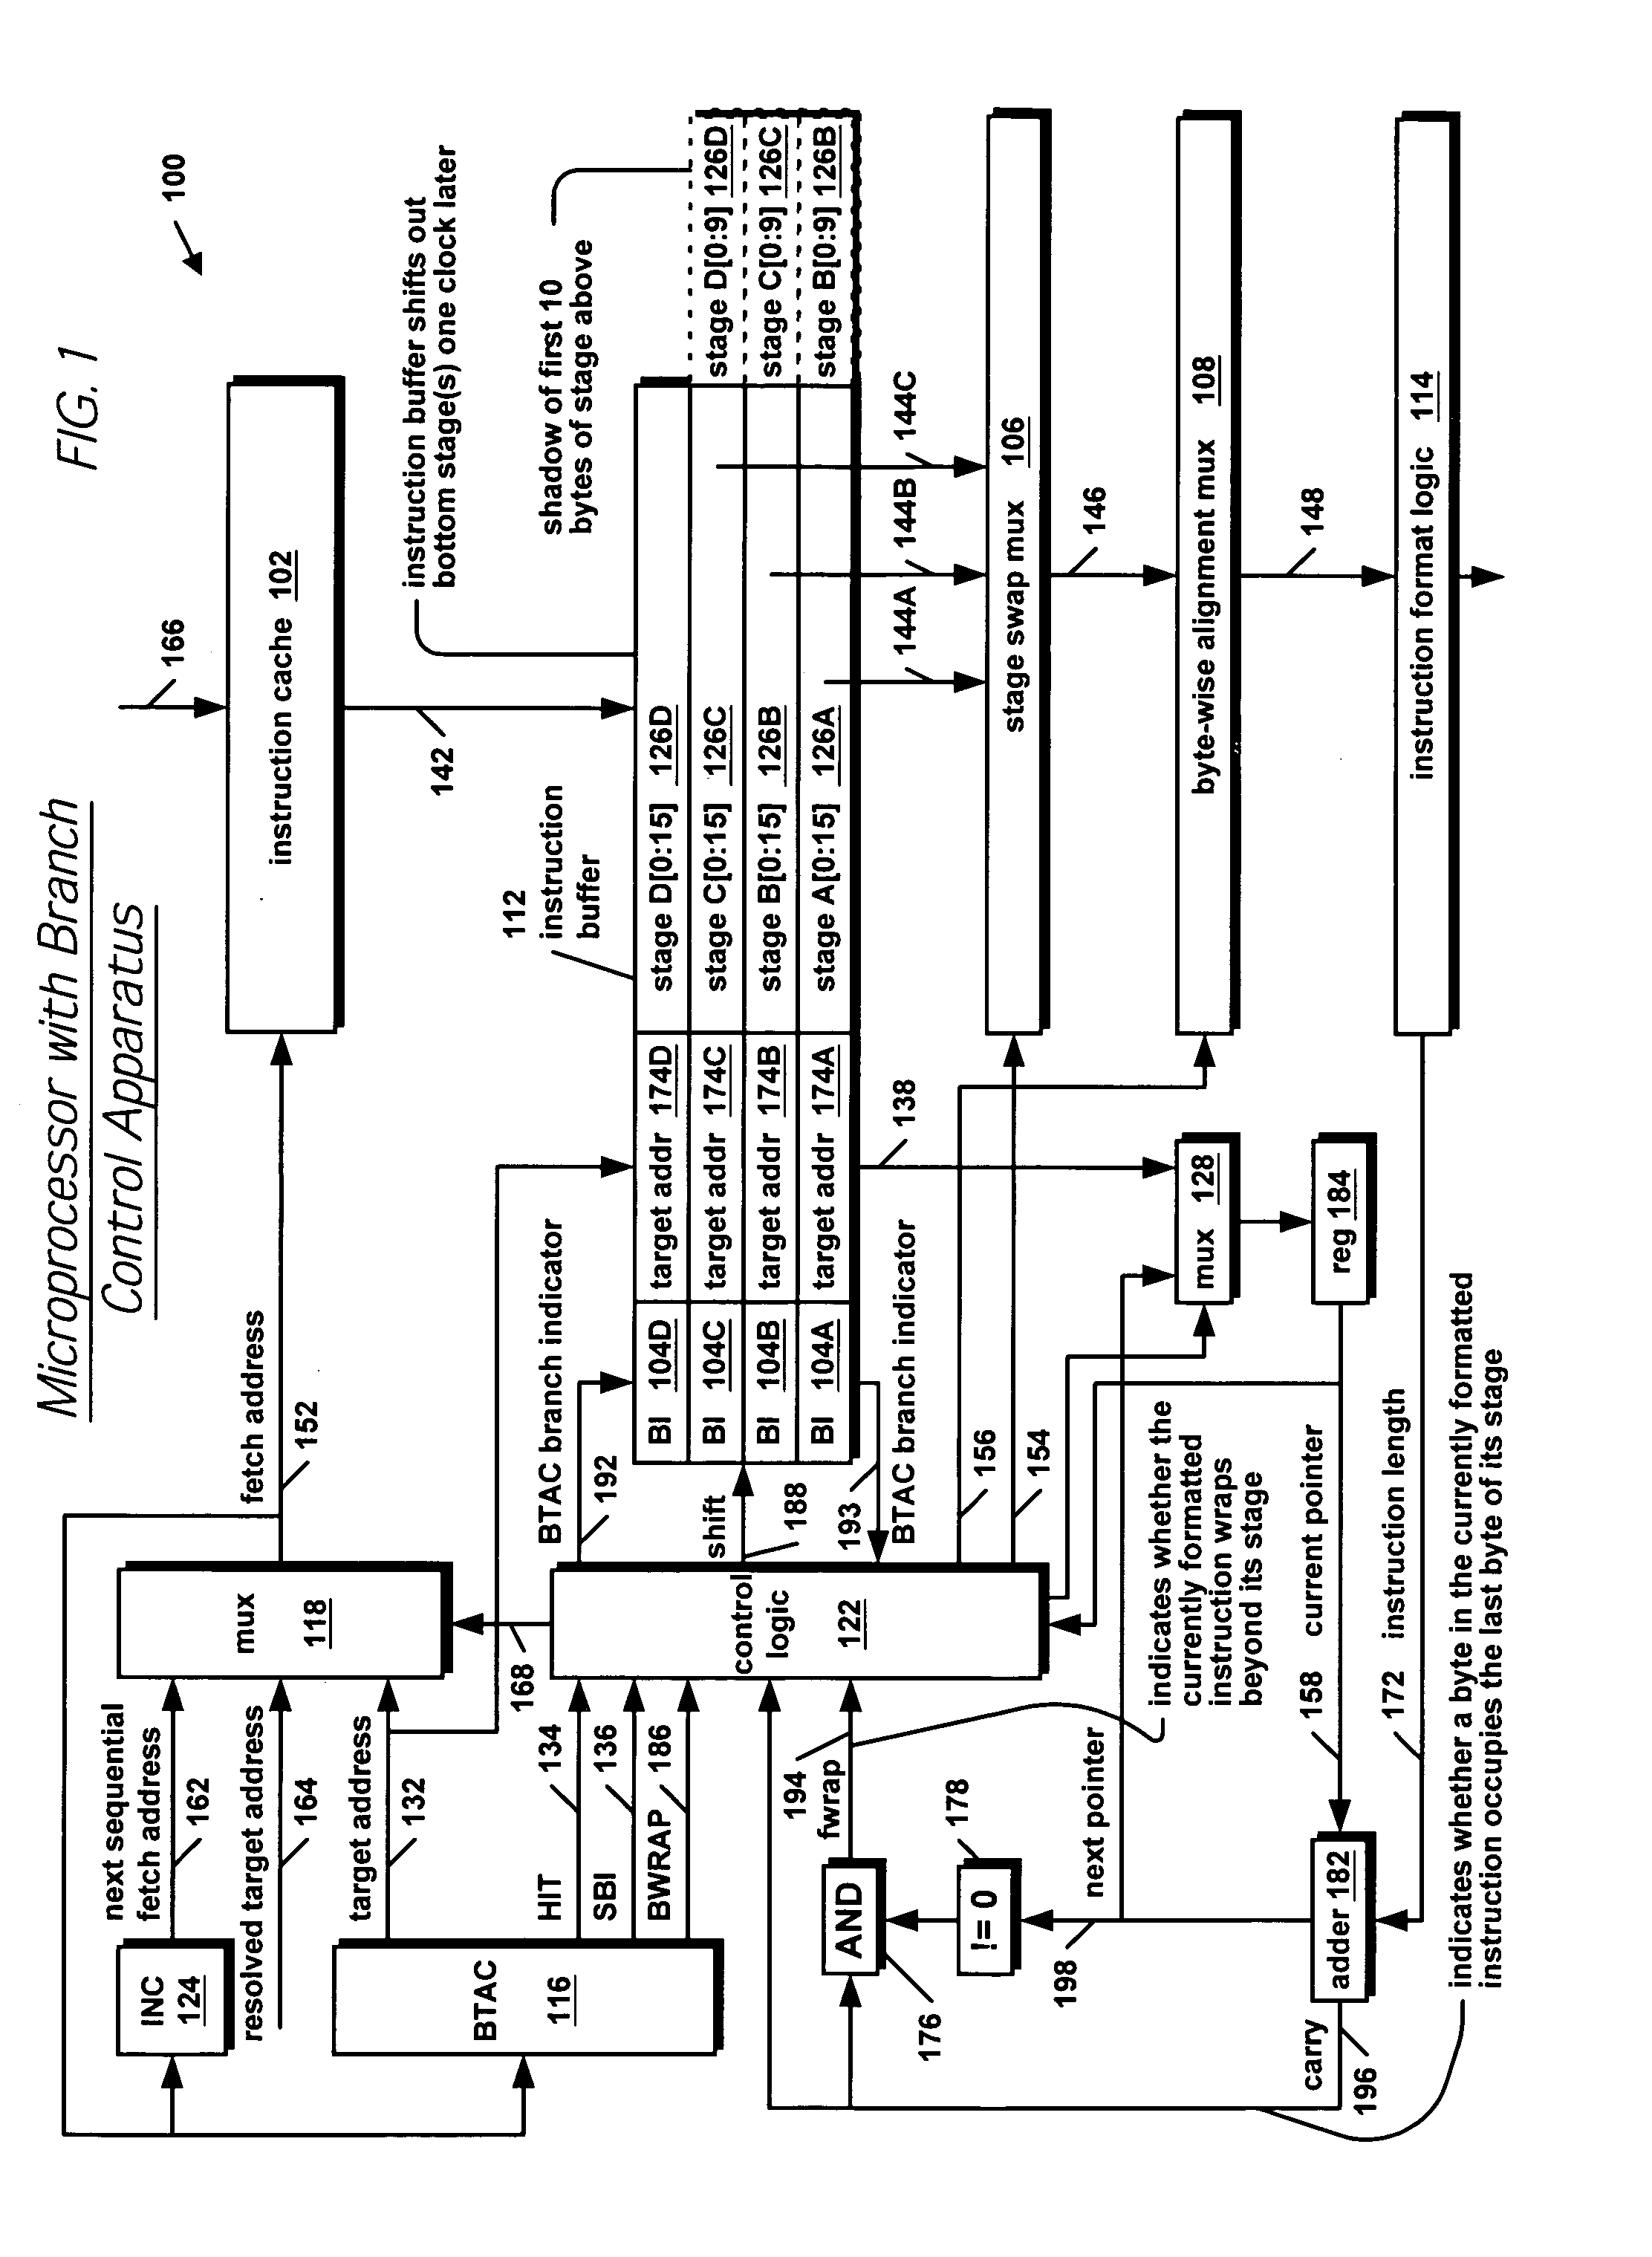 Apparatus and method for selectively accessing disparate instruction buffer stages based on branch target address cache hit and instruction stage wrap